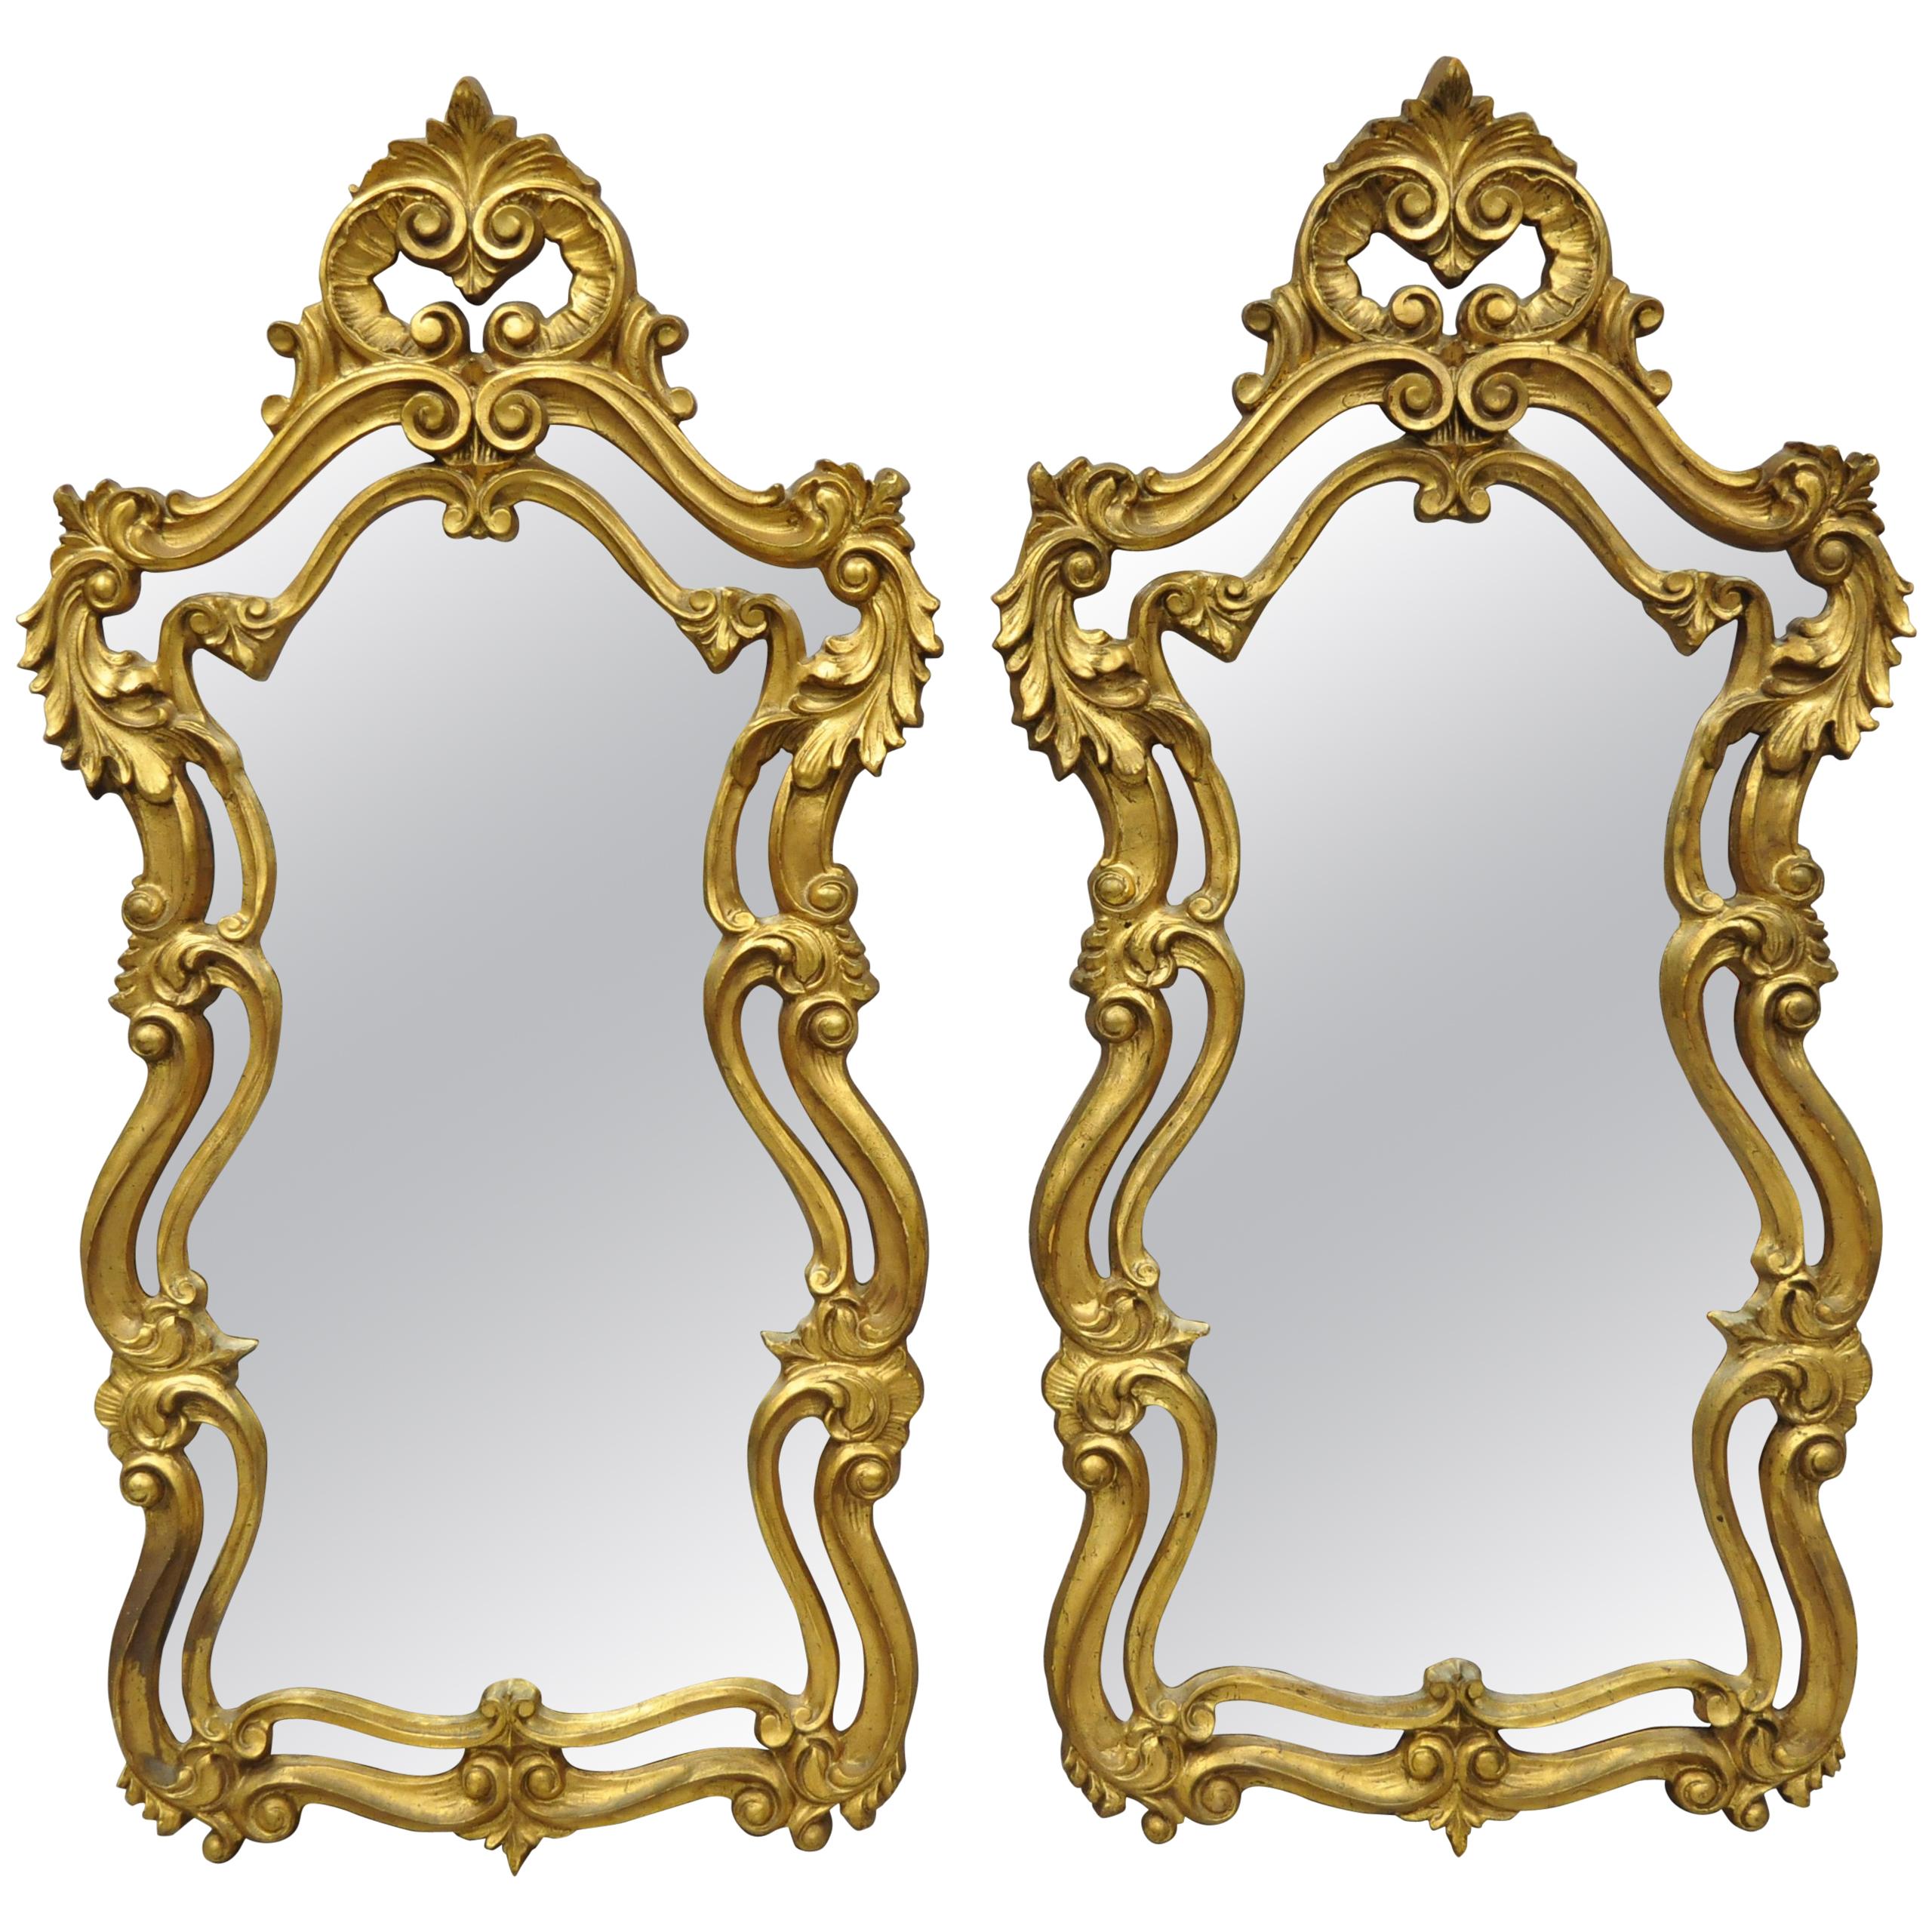 Pair of French Rococo Style Gold Wall Mirrors with Fancy Scroll Work